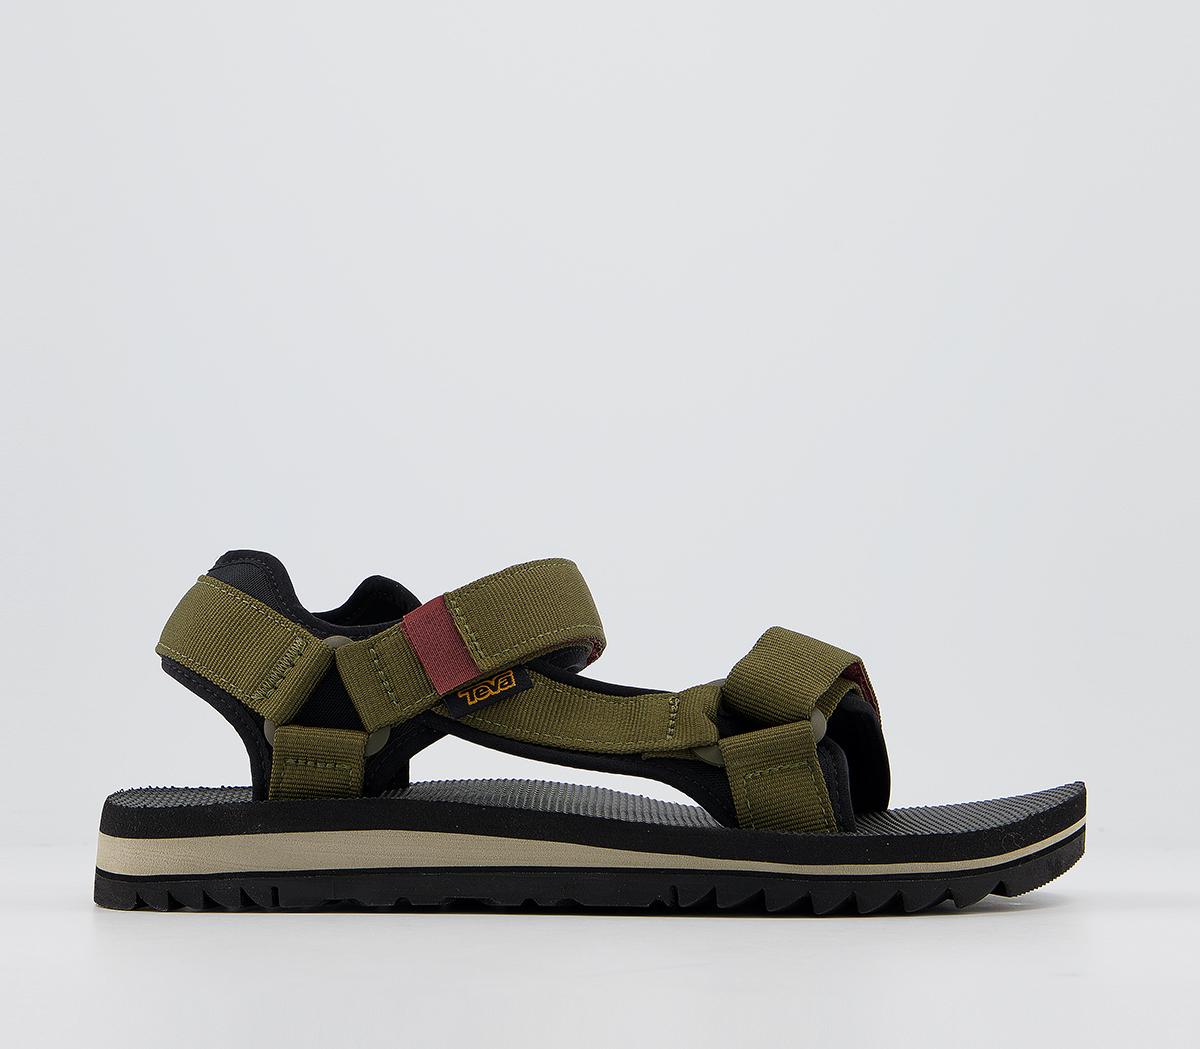 TevaUniversal Trail SandalsOlive Green